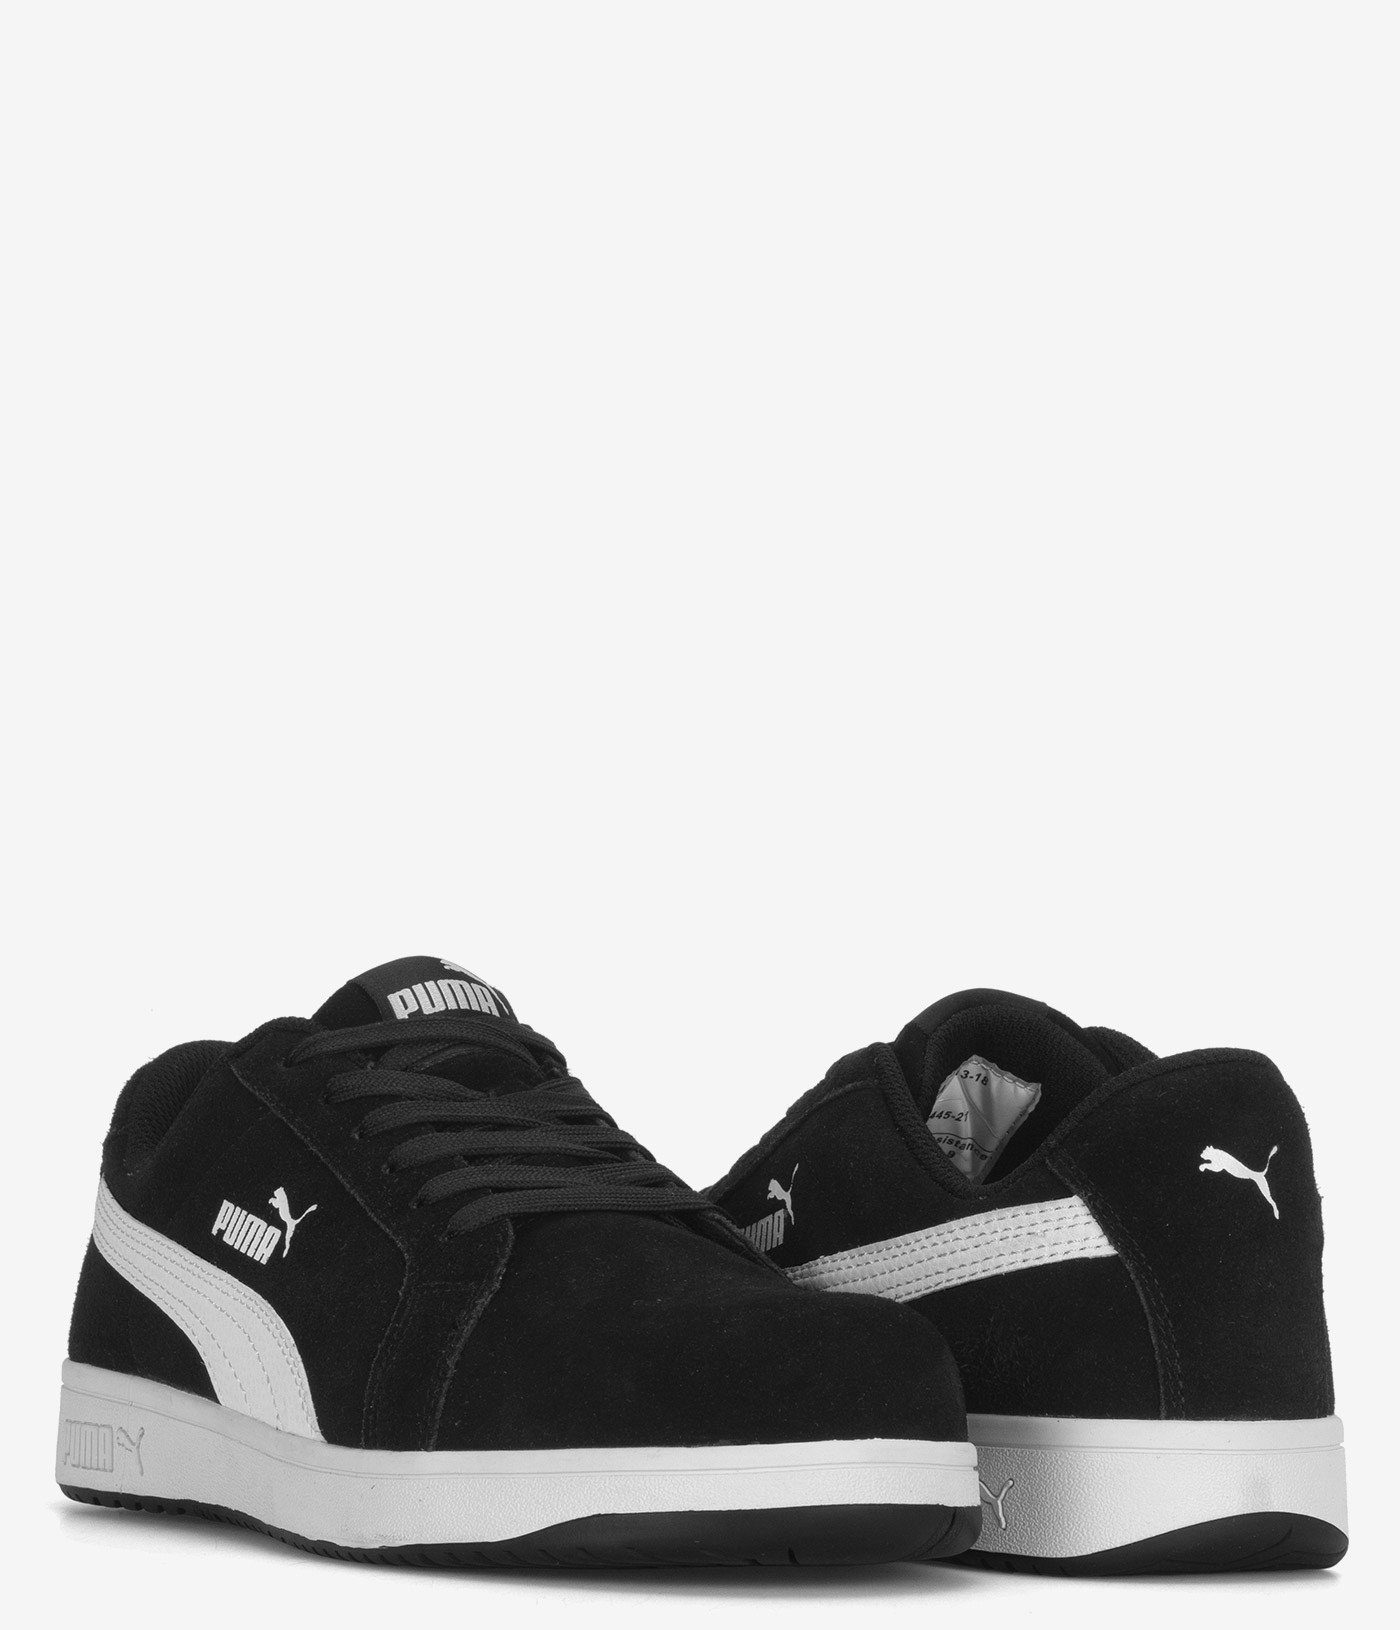 PUMA Safety Iconic Suede Low Composite Toe Shoe | Pair